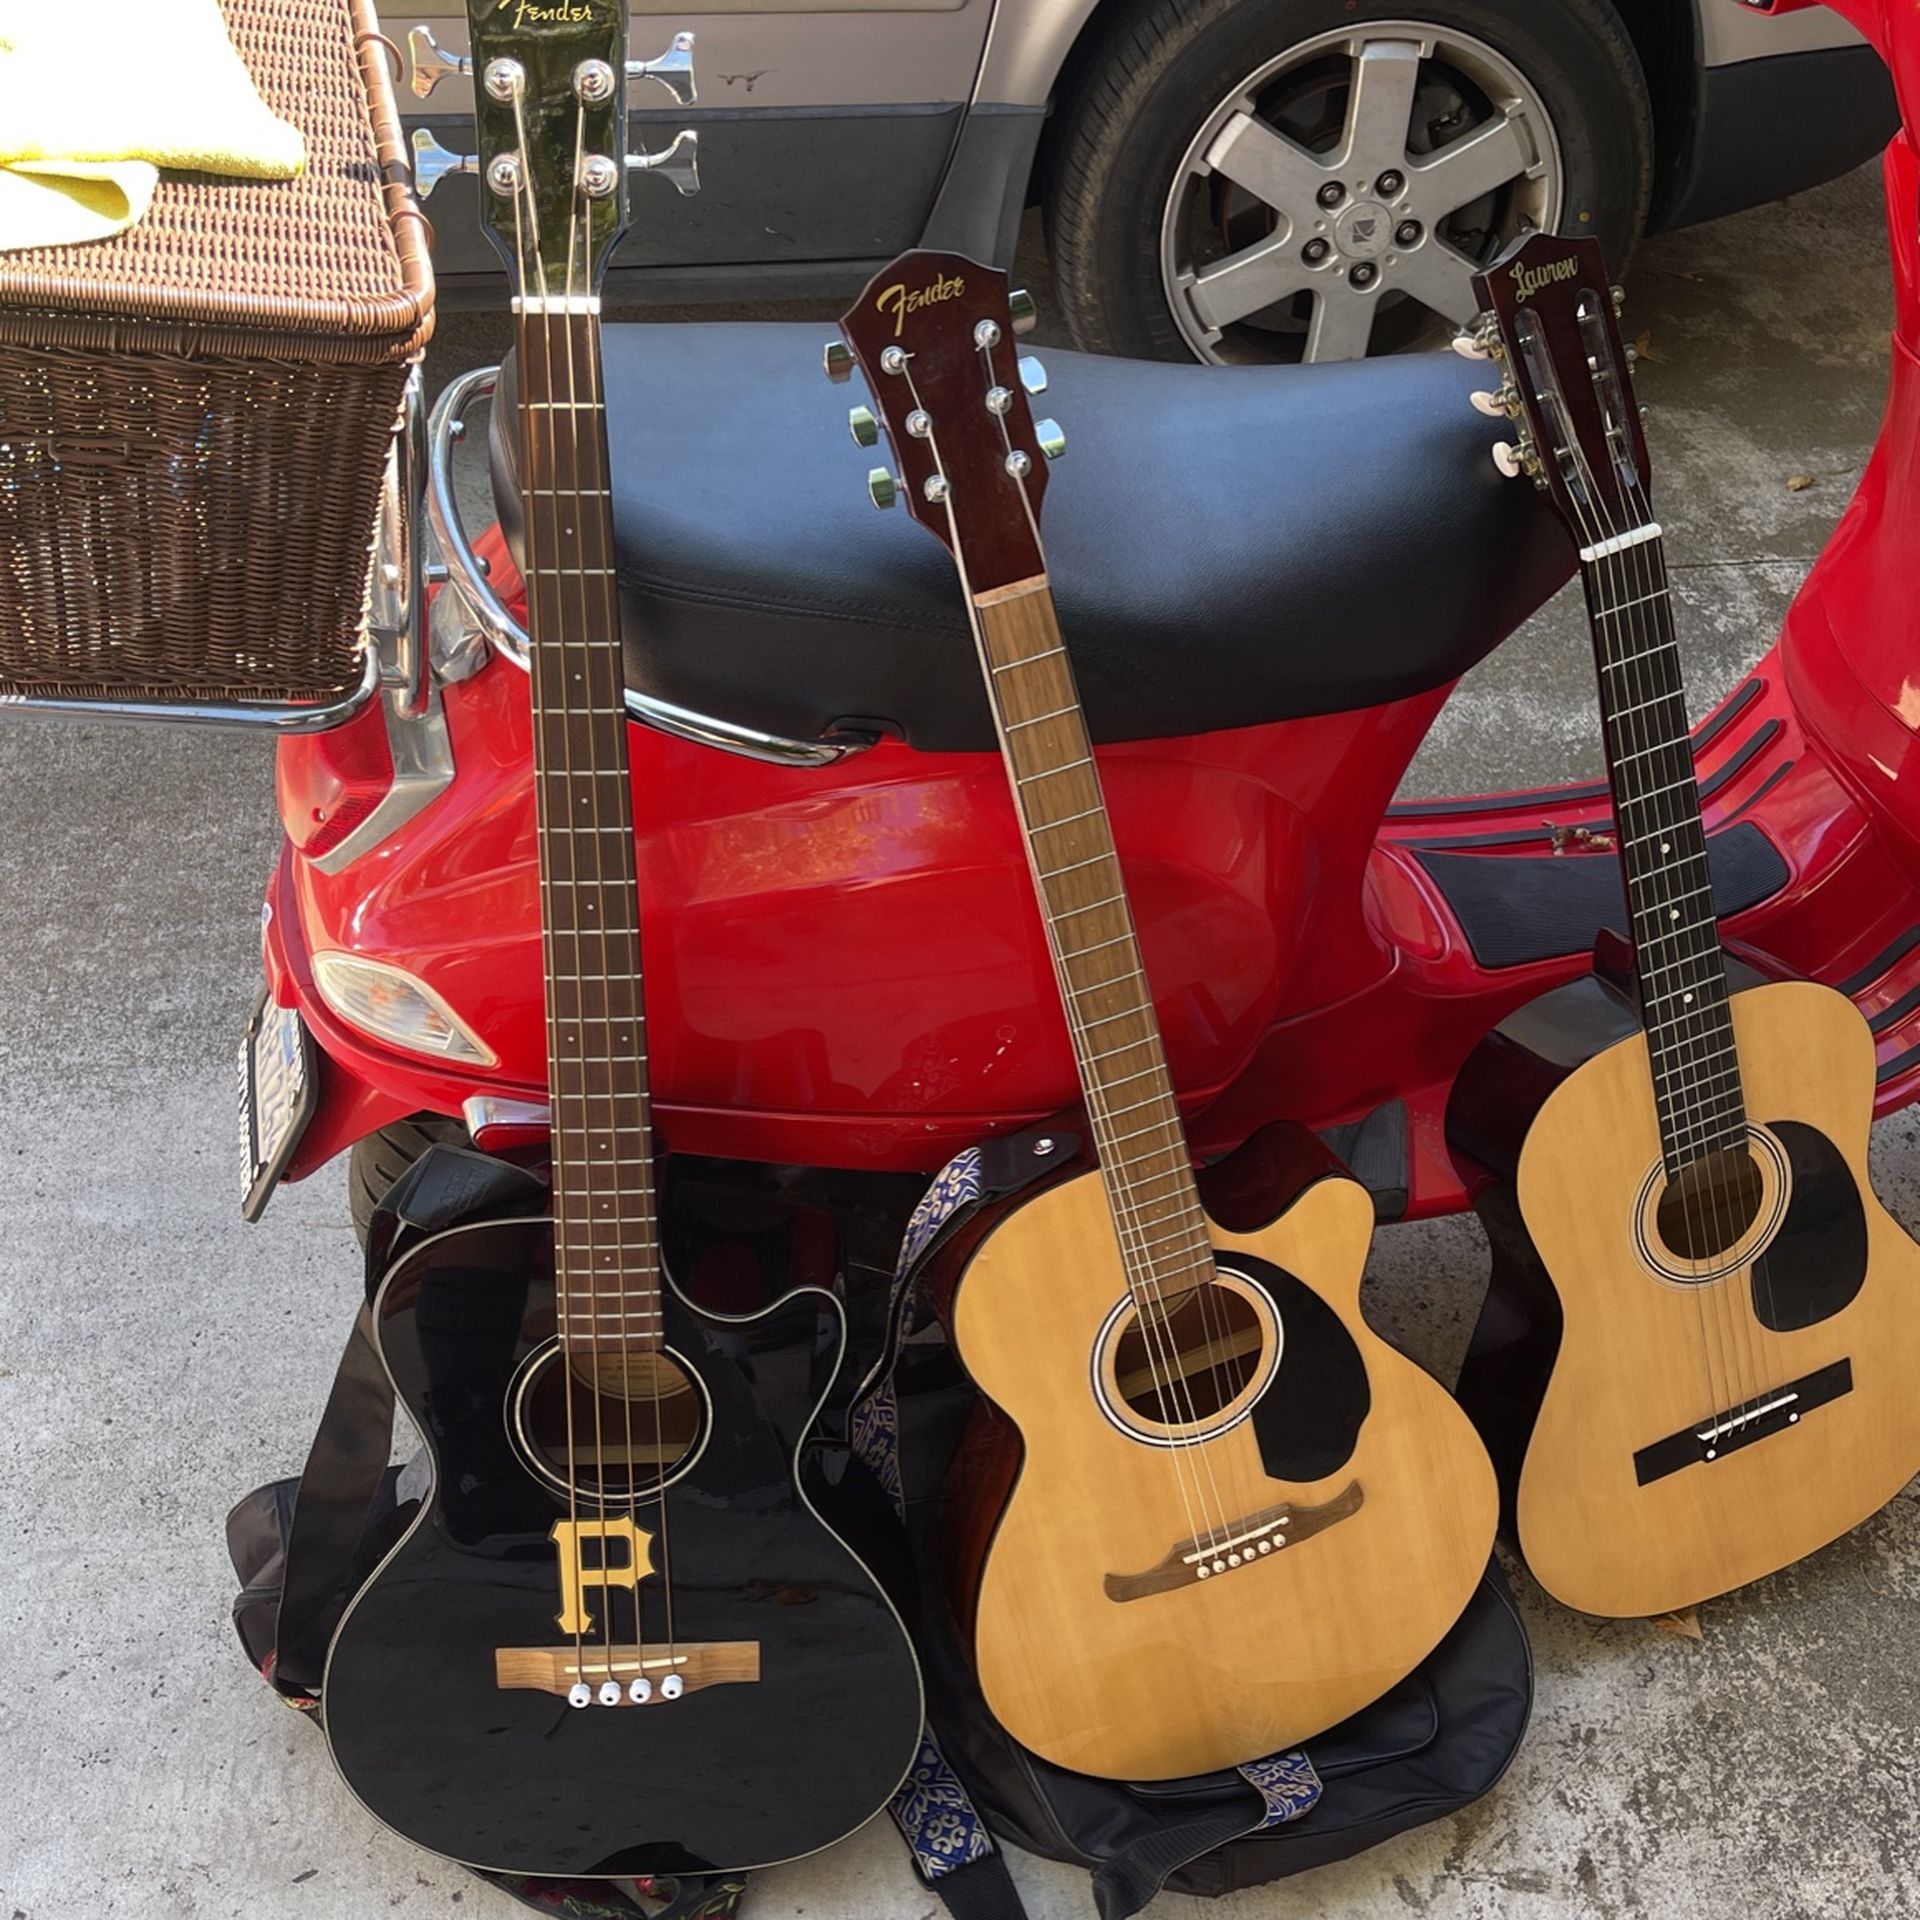 Acoustic Bass Guitar, And Two Normal Guitars